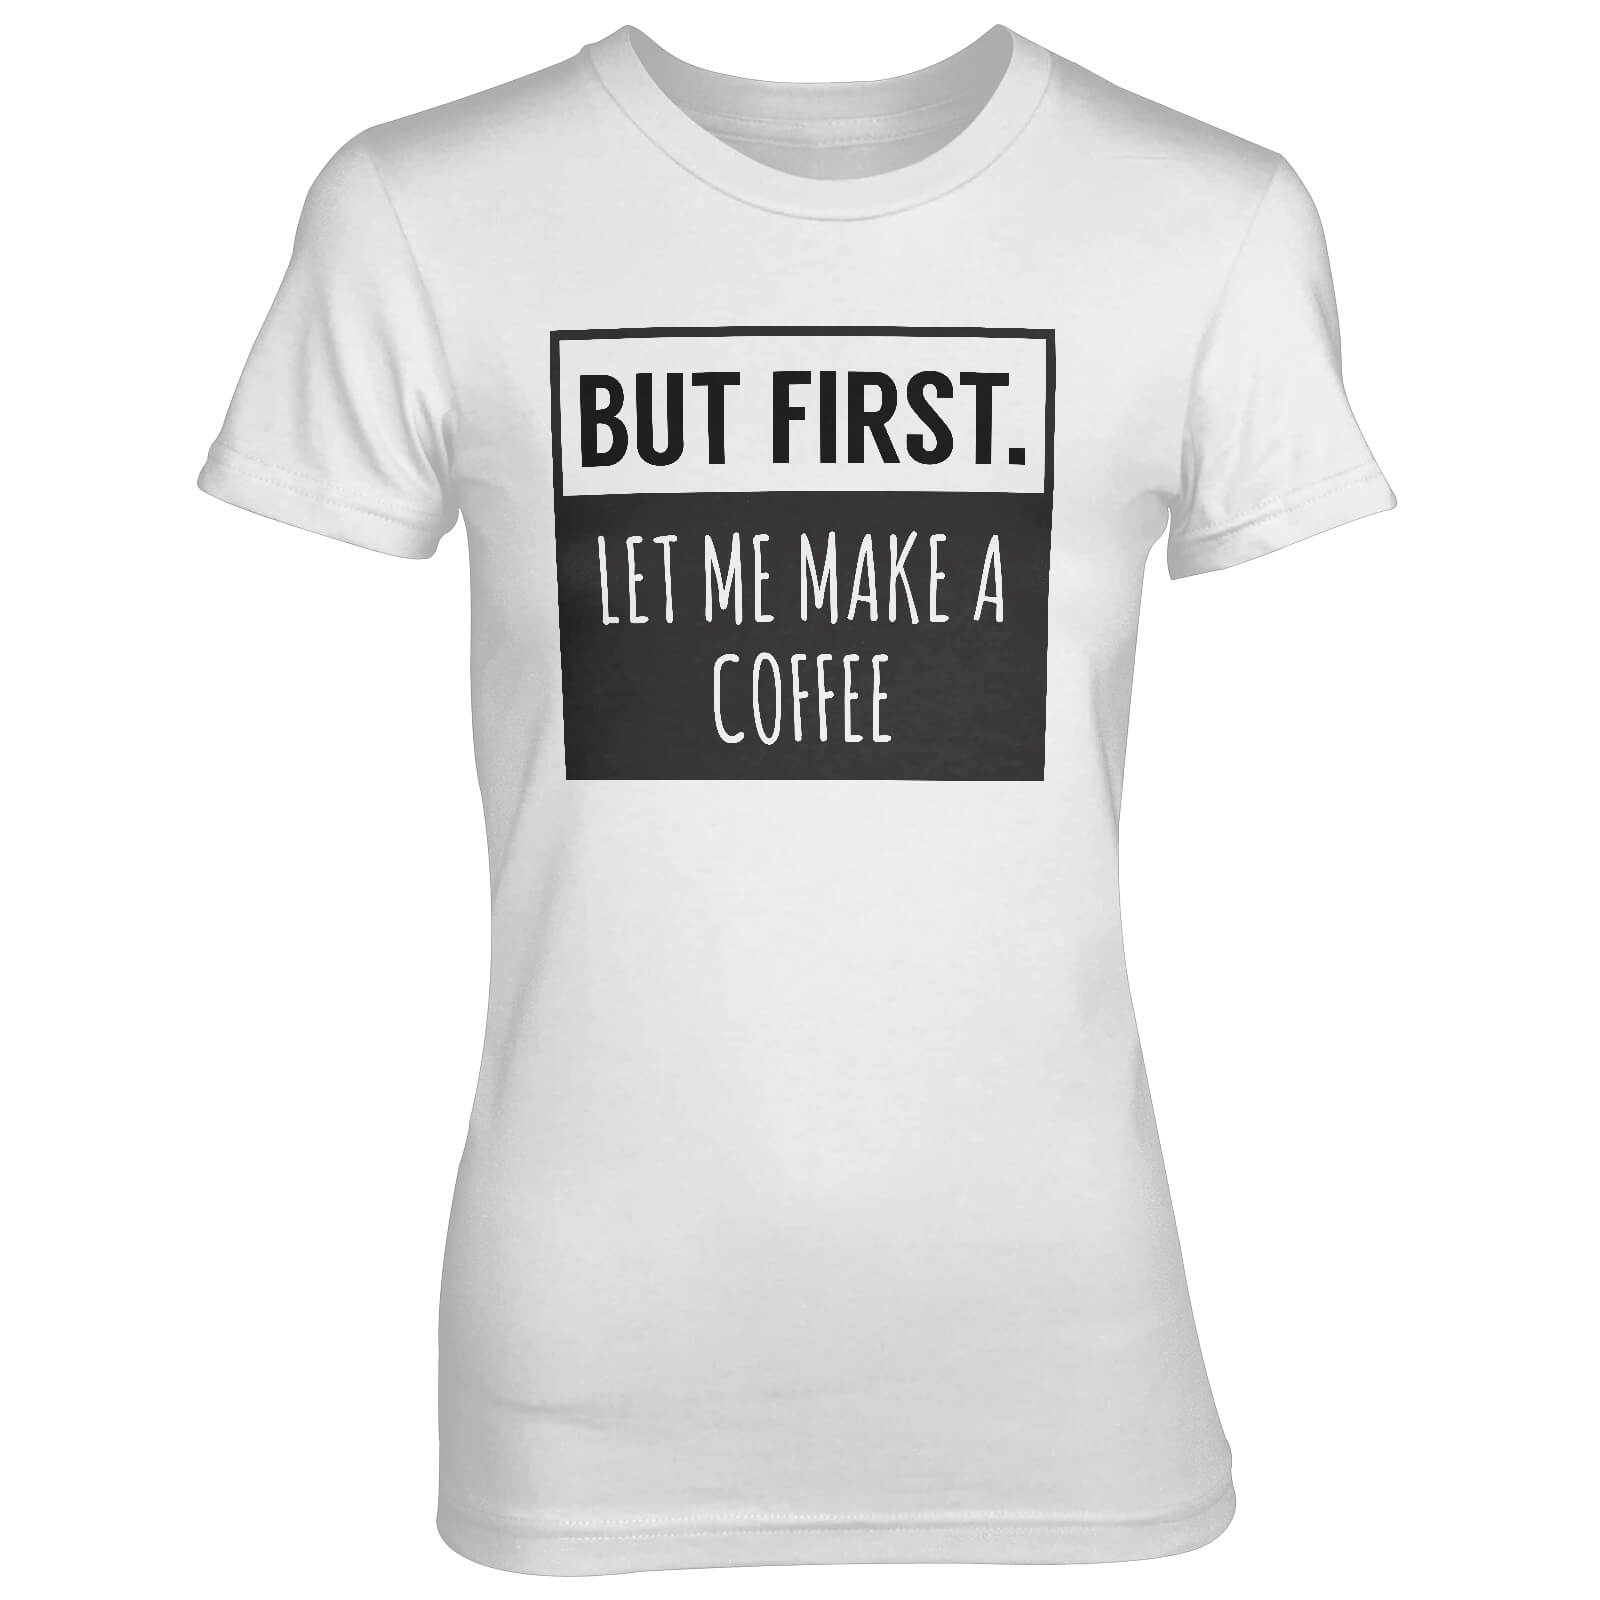 But First Let Me Make A Coffee Women's White T-Shirt - S - White